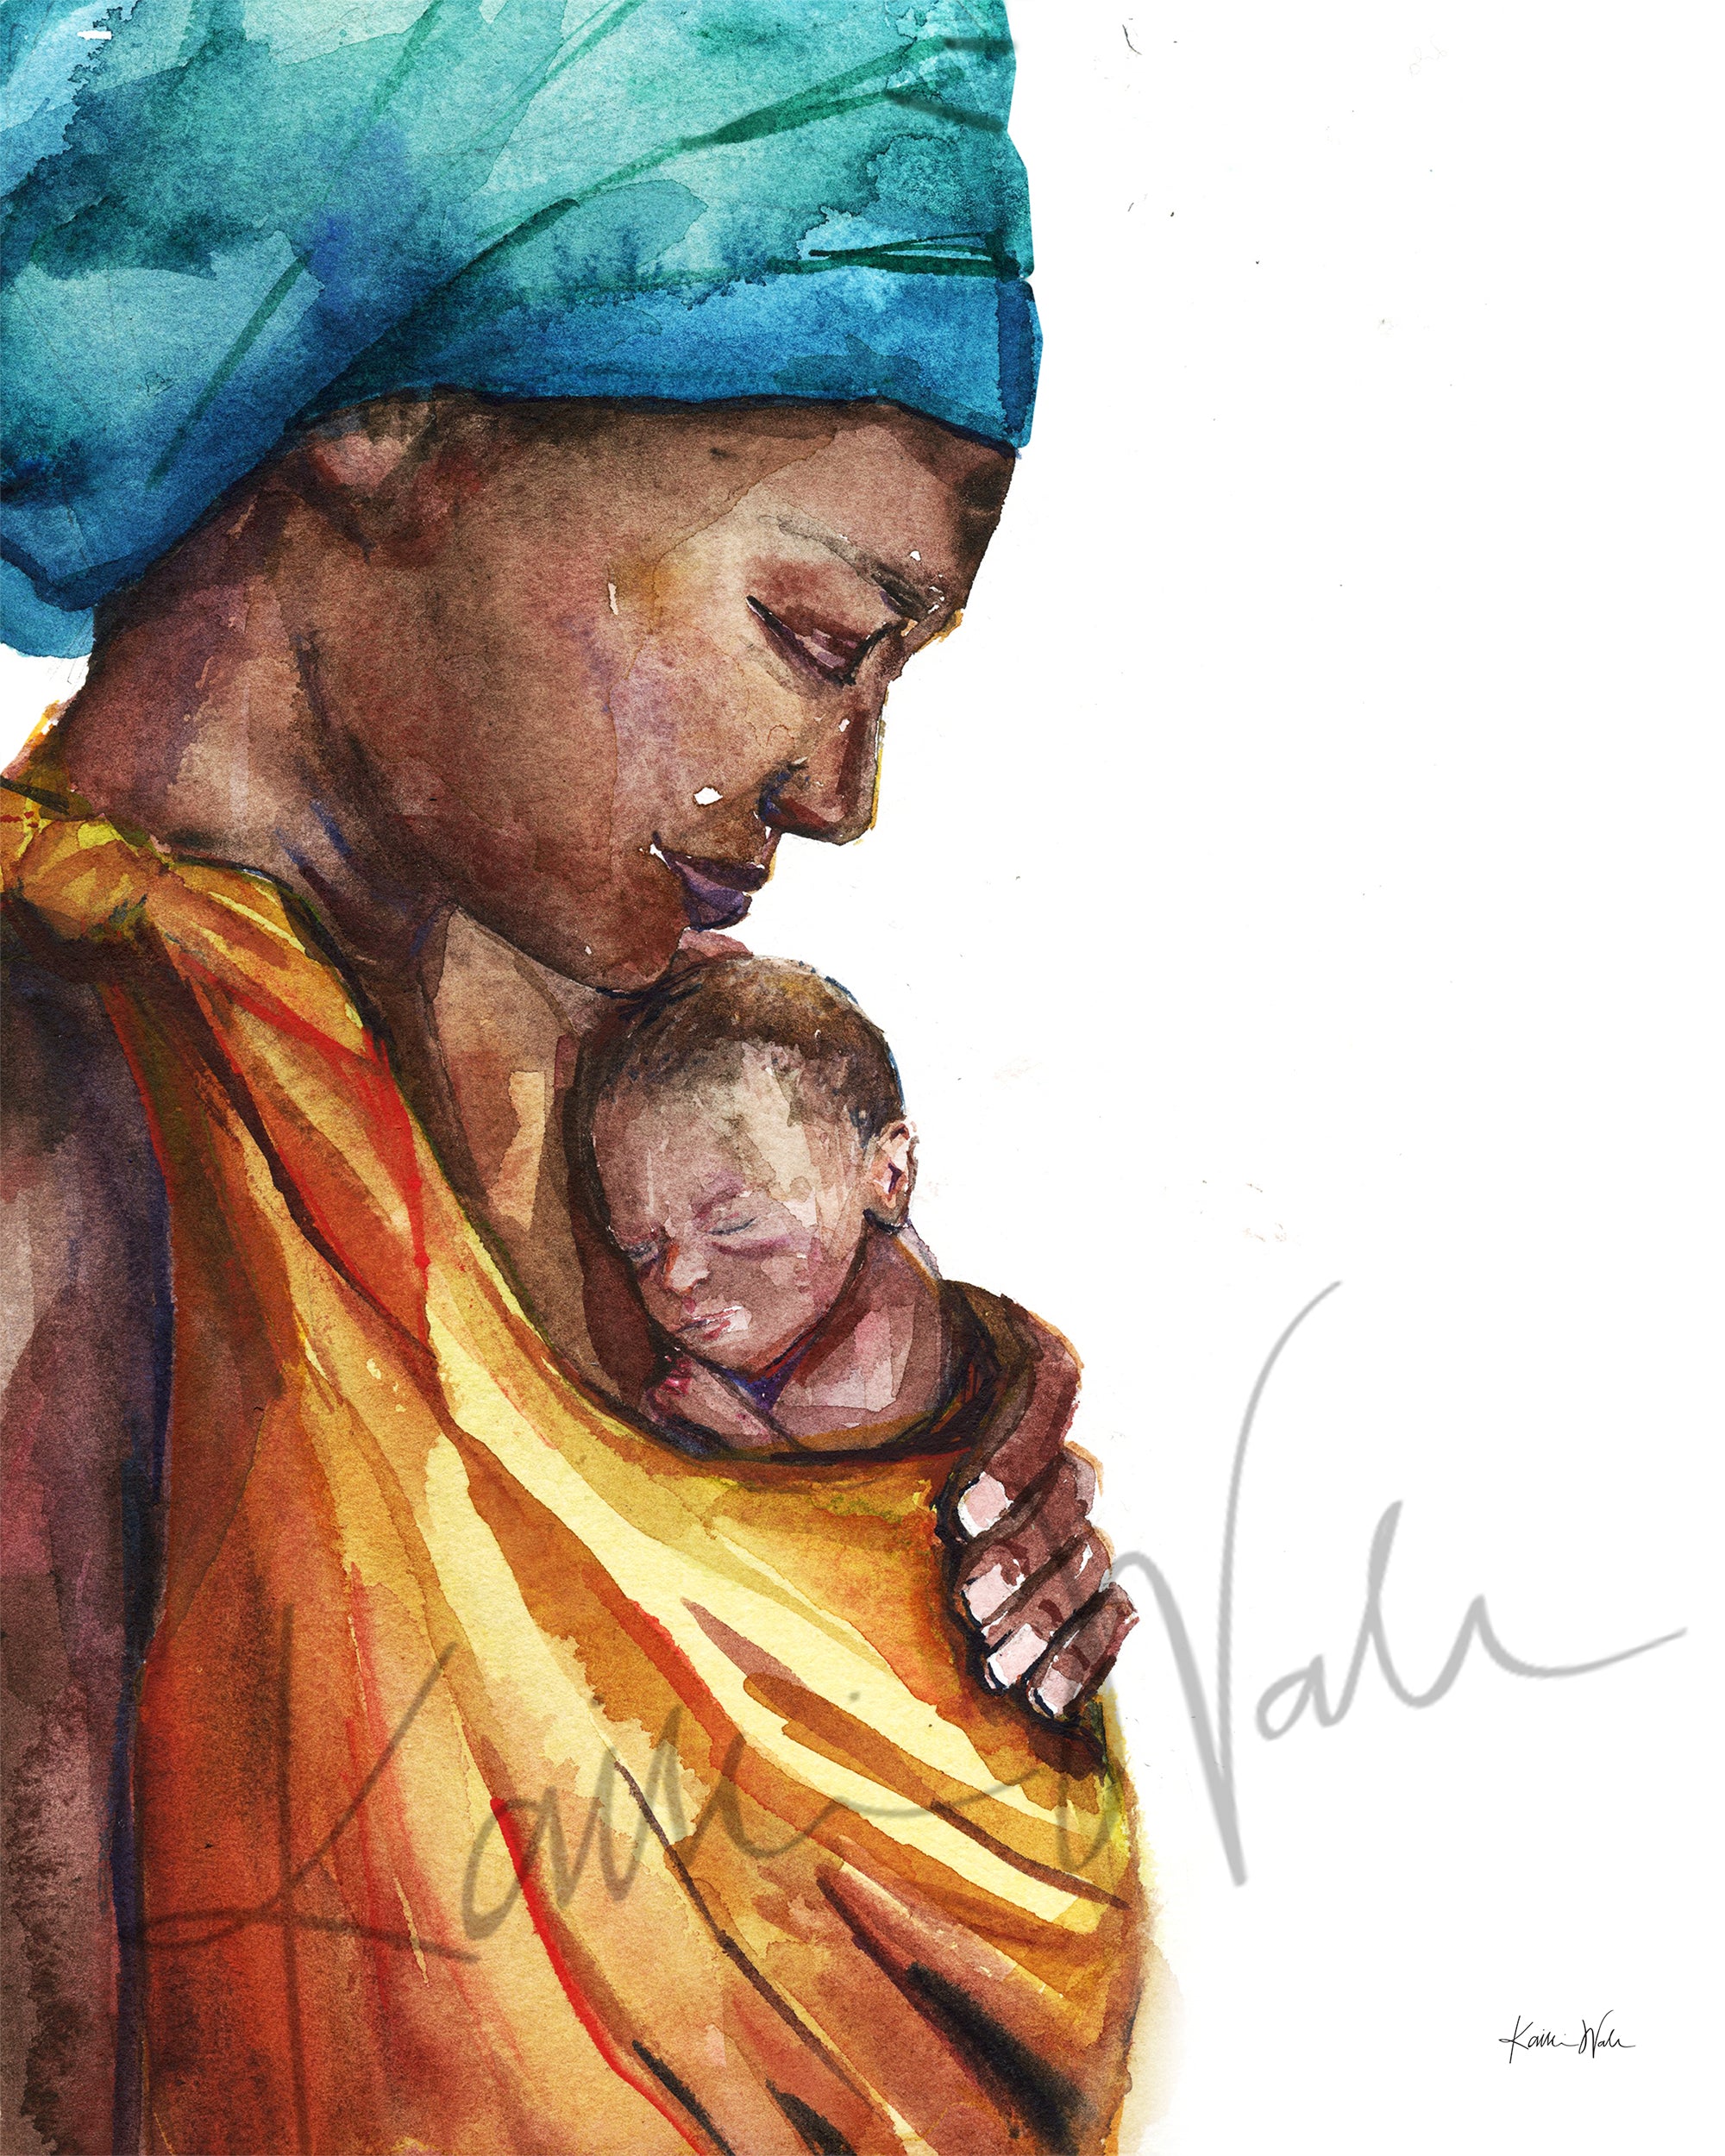 Unframed watercolor painting of an african woman holding her premature infant. She is wearing a teal head wrap and is wearing her child in an orange wrap.